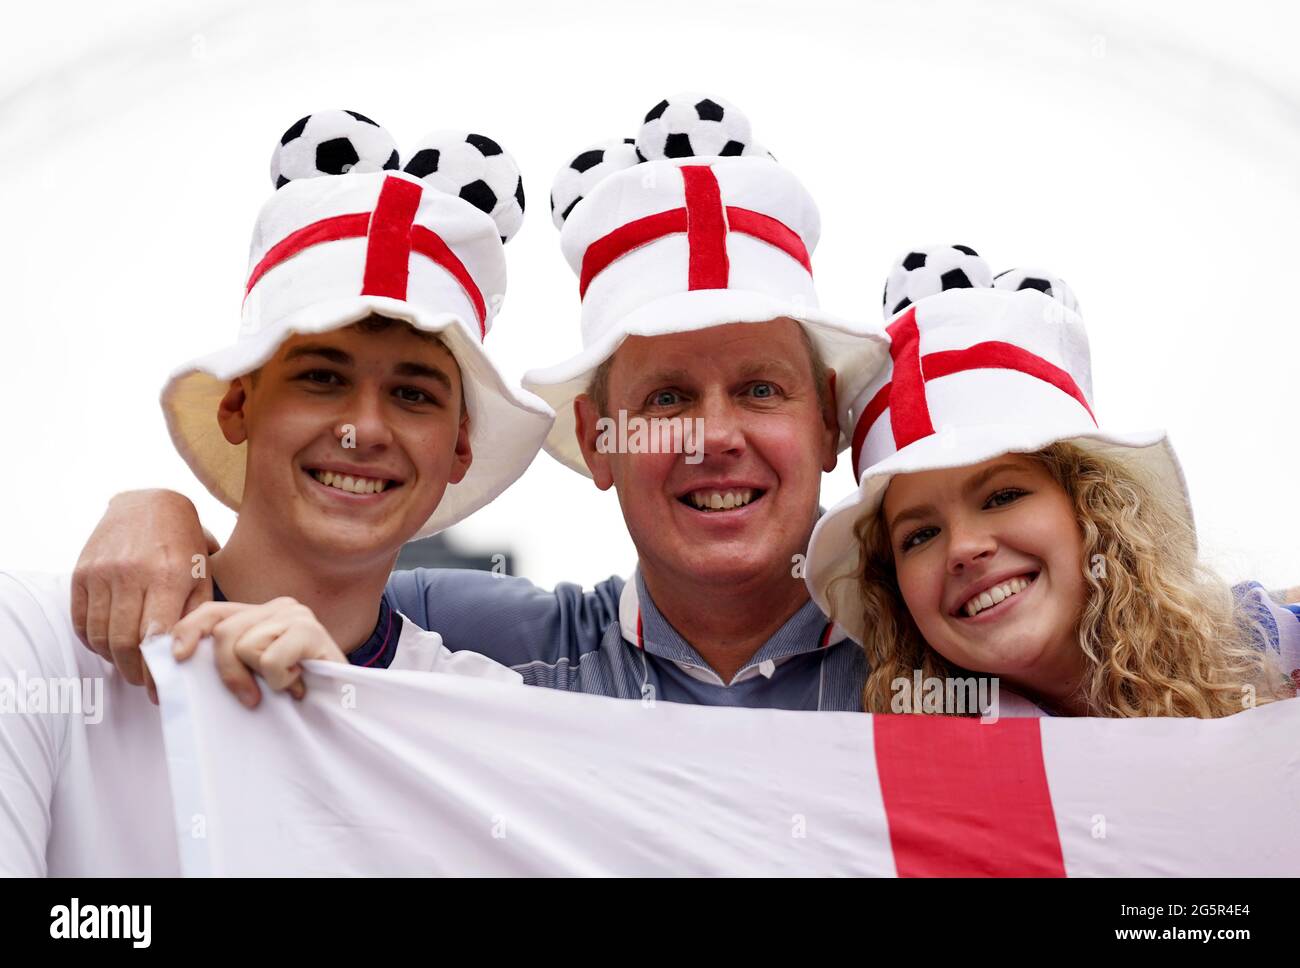 Fans watch the UEFA Euro 2020 round of 16 match between England and Germany at the 4TheFans fan zone outside Wembley Stadium. Picture date: Tuesday June 29, 2021. Stock Photo